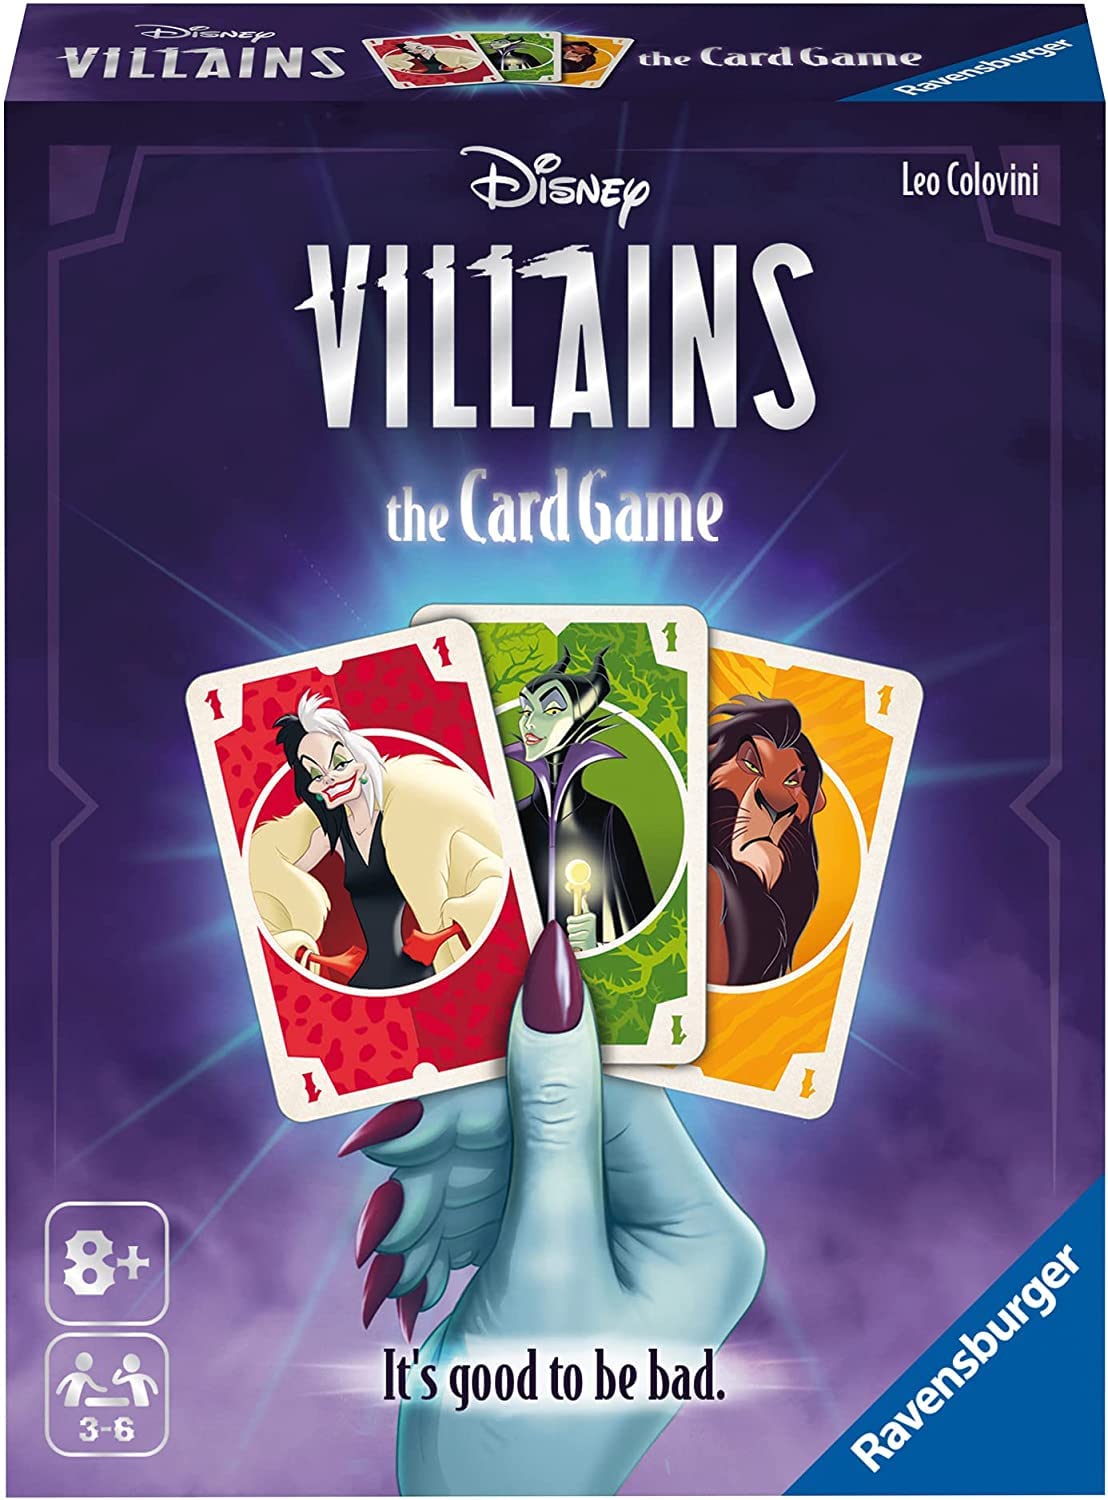 Ravensburger Disney Villains The Card Game – A Wickedly Fun Card Game for Boys and Girls Ages 8 and Up